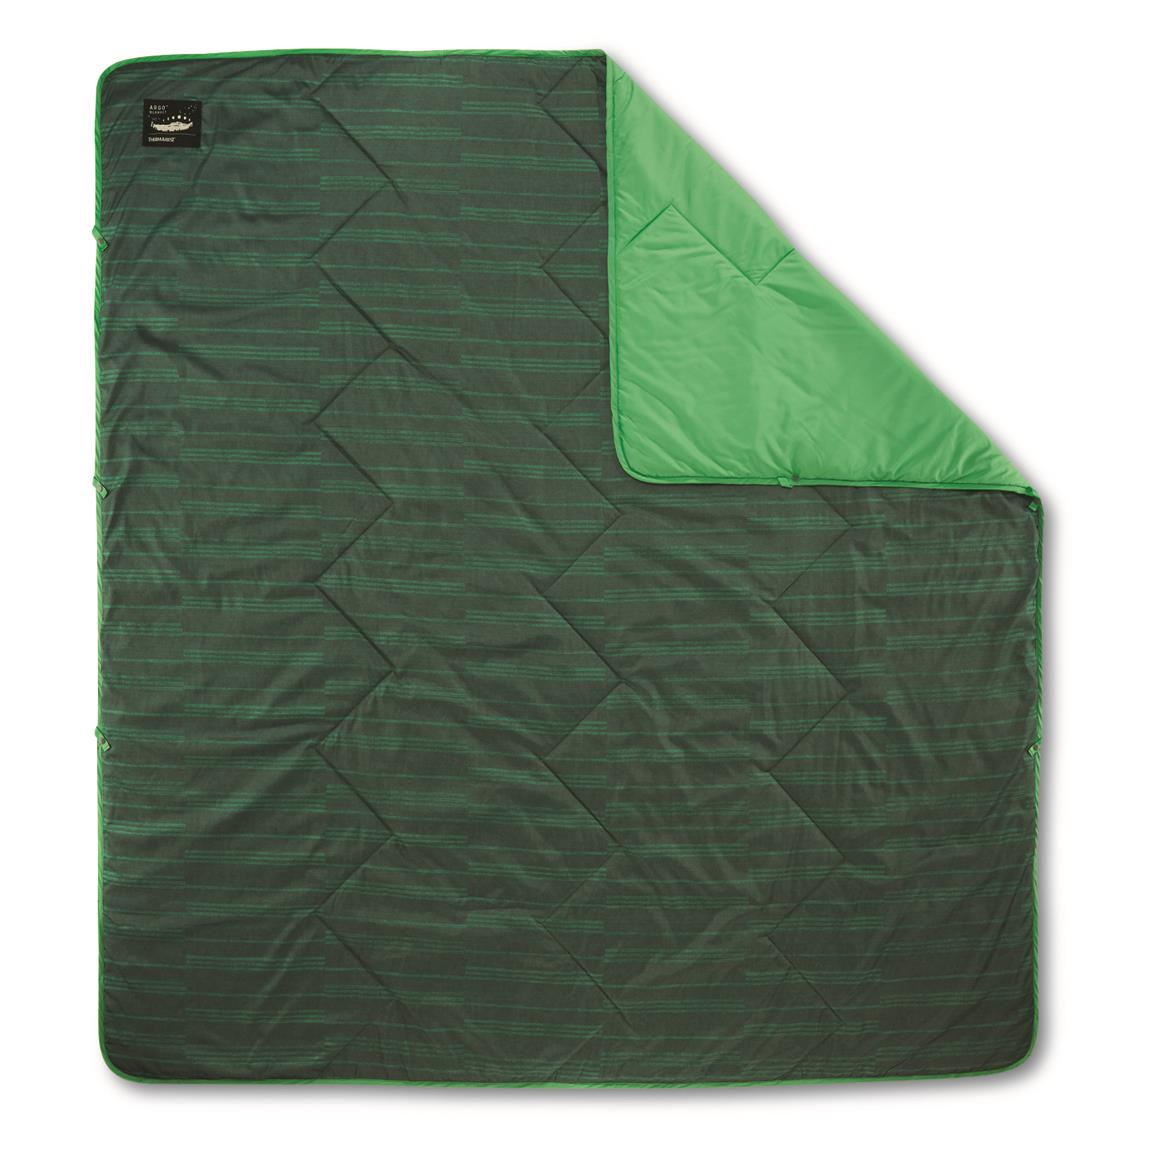 Therm-a-Rest Argo Outdoor Blanket, Green Print